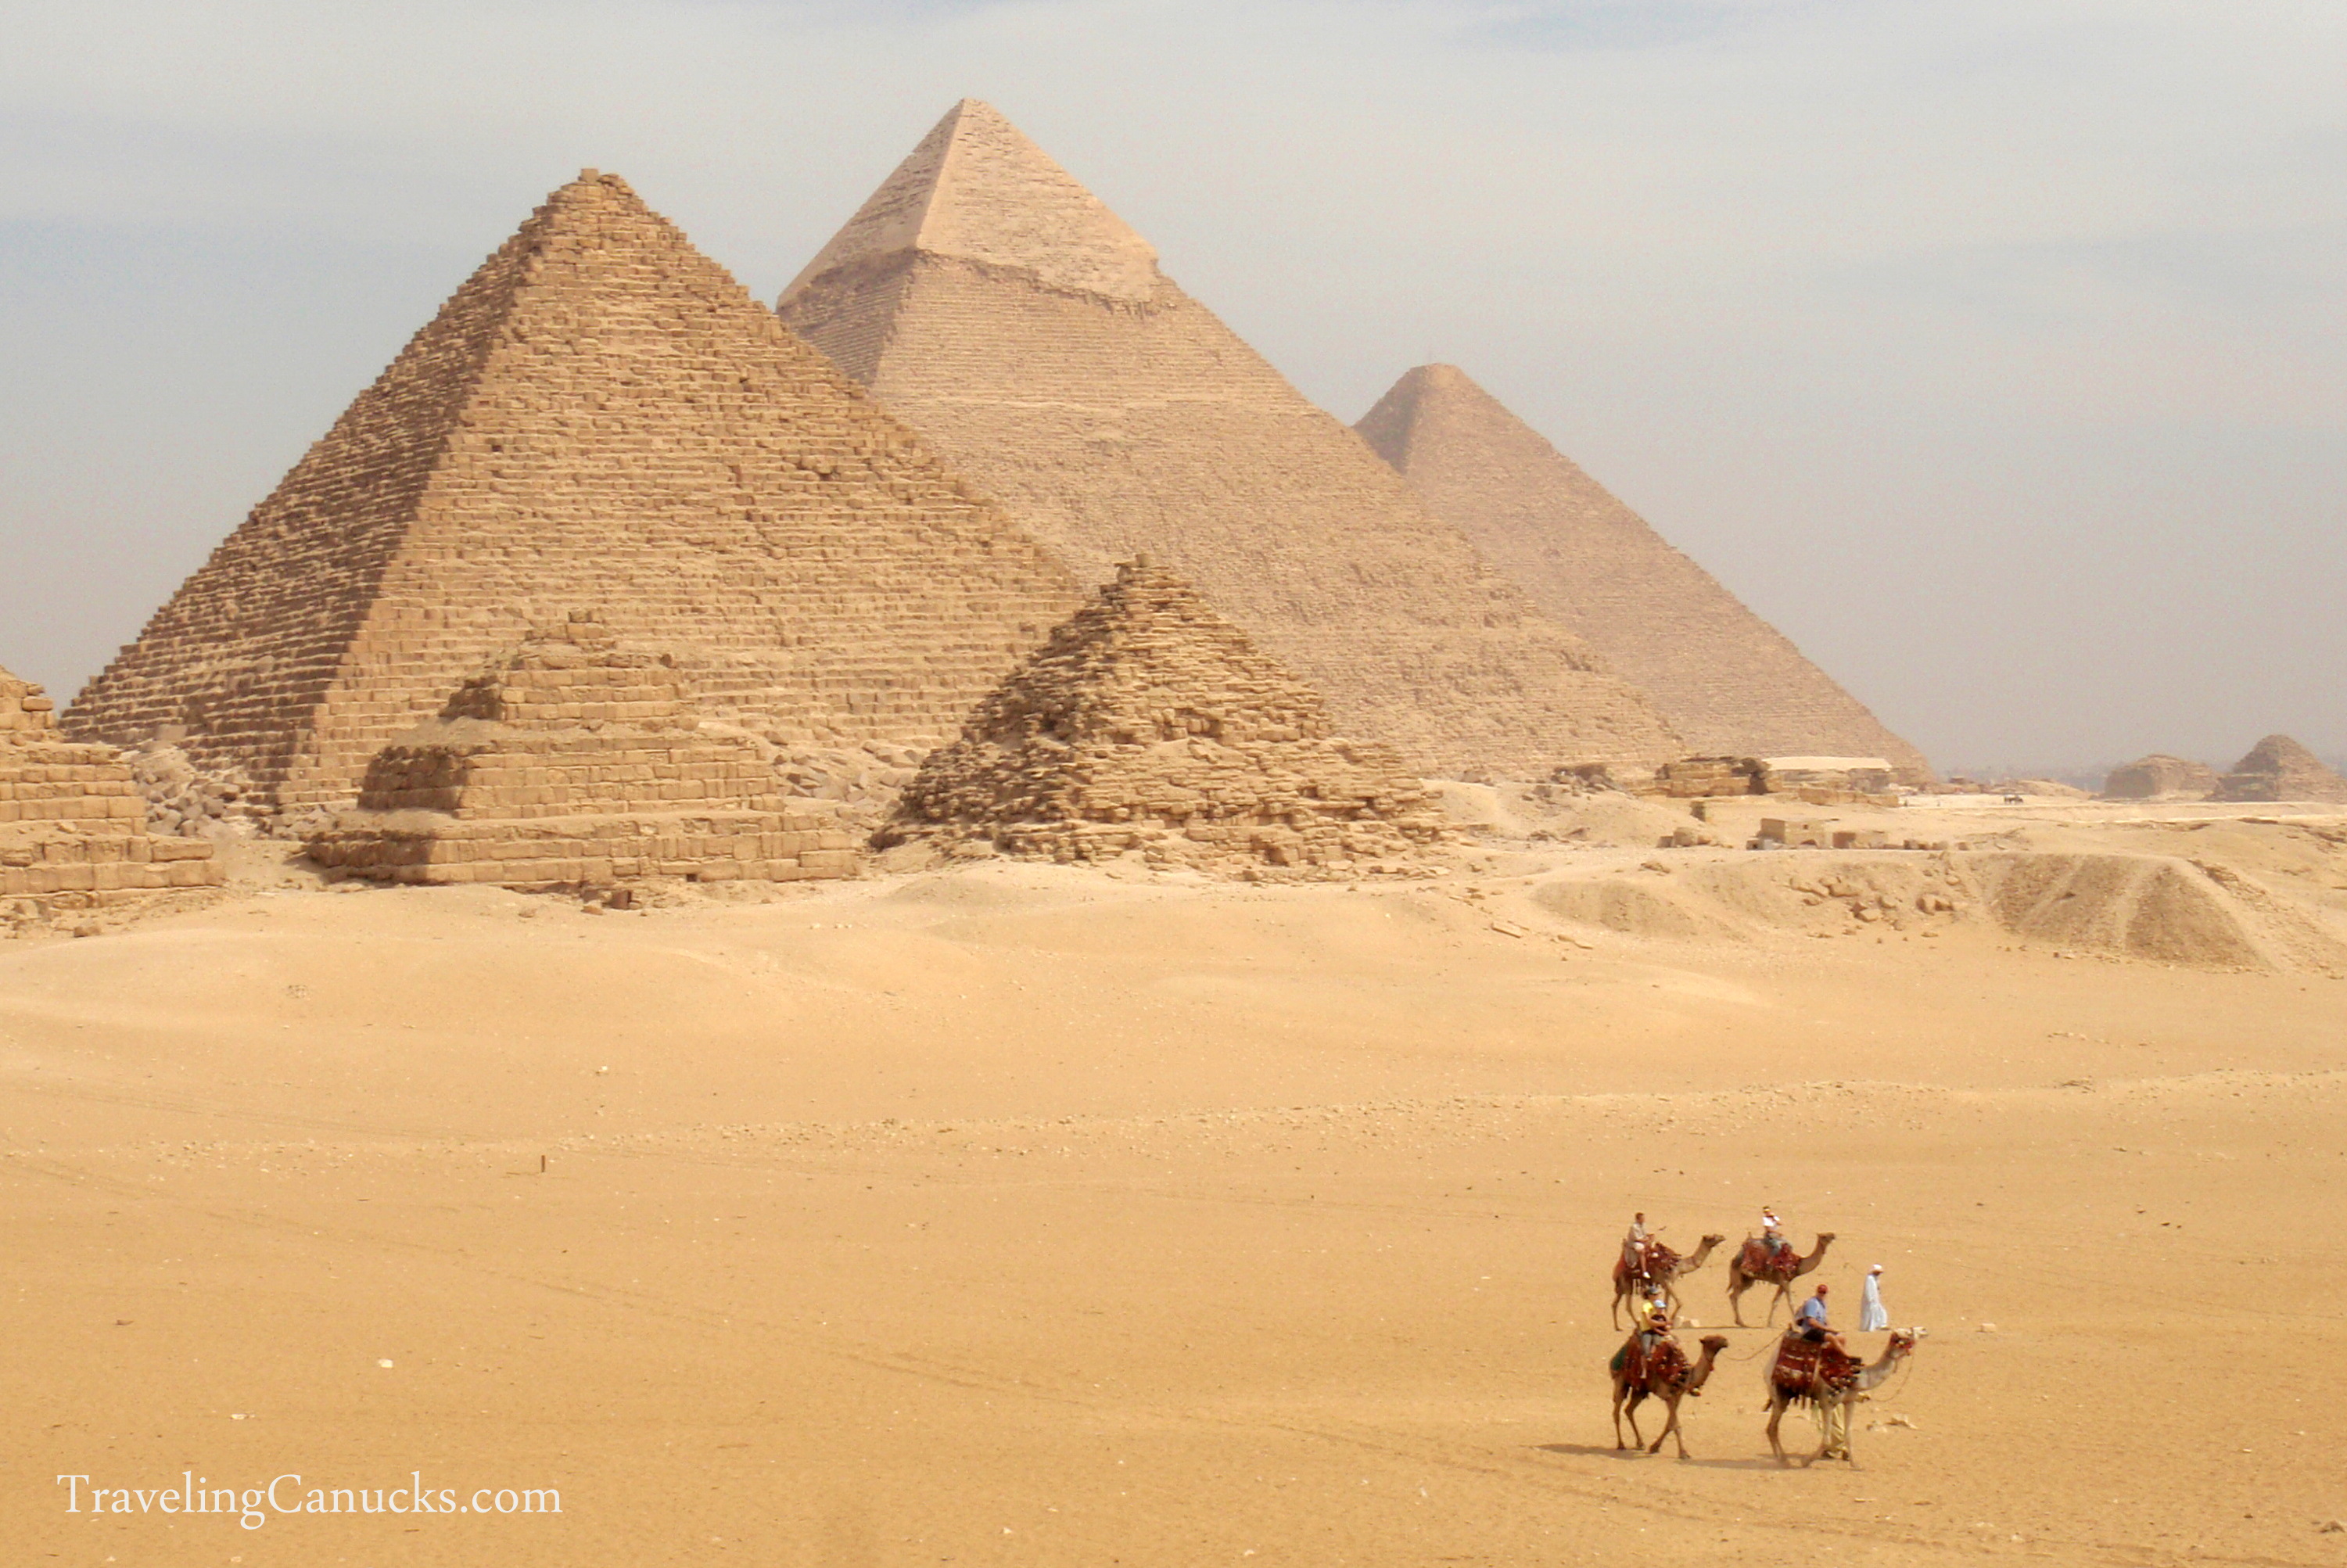 Pictures of the Great Pyramids of Giza in Egypt